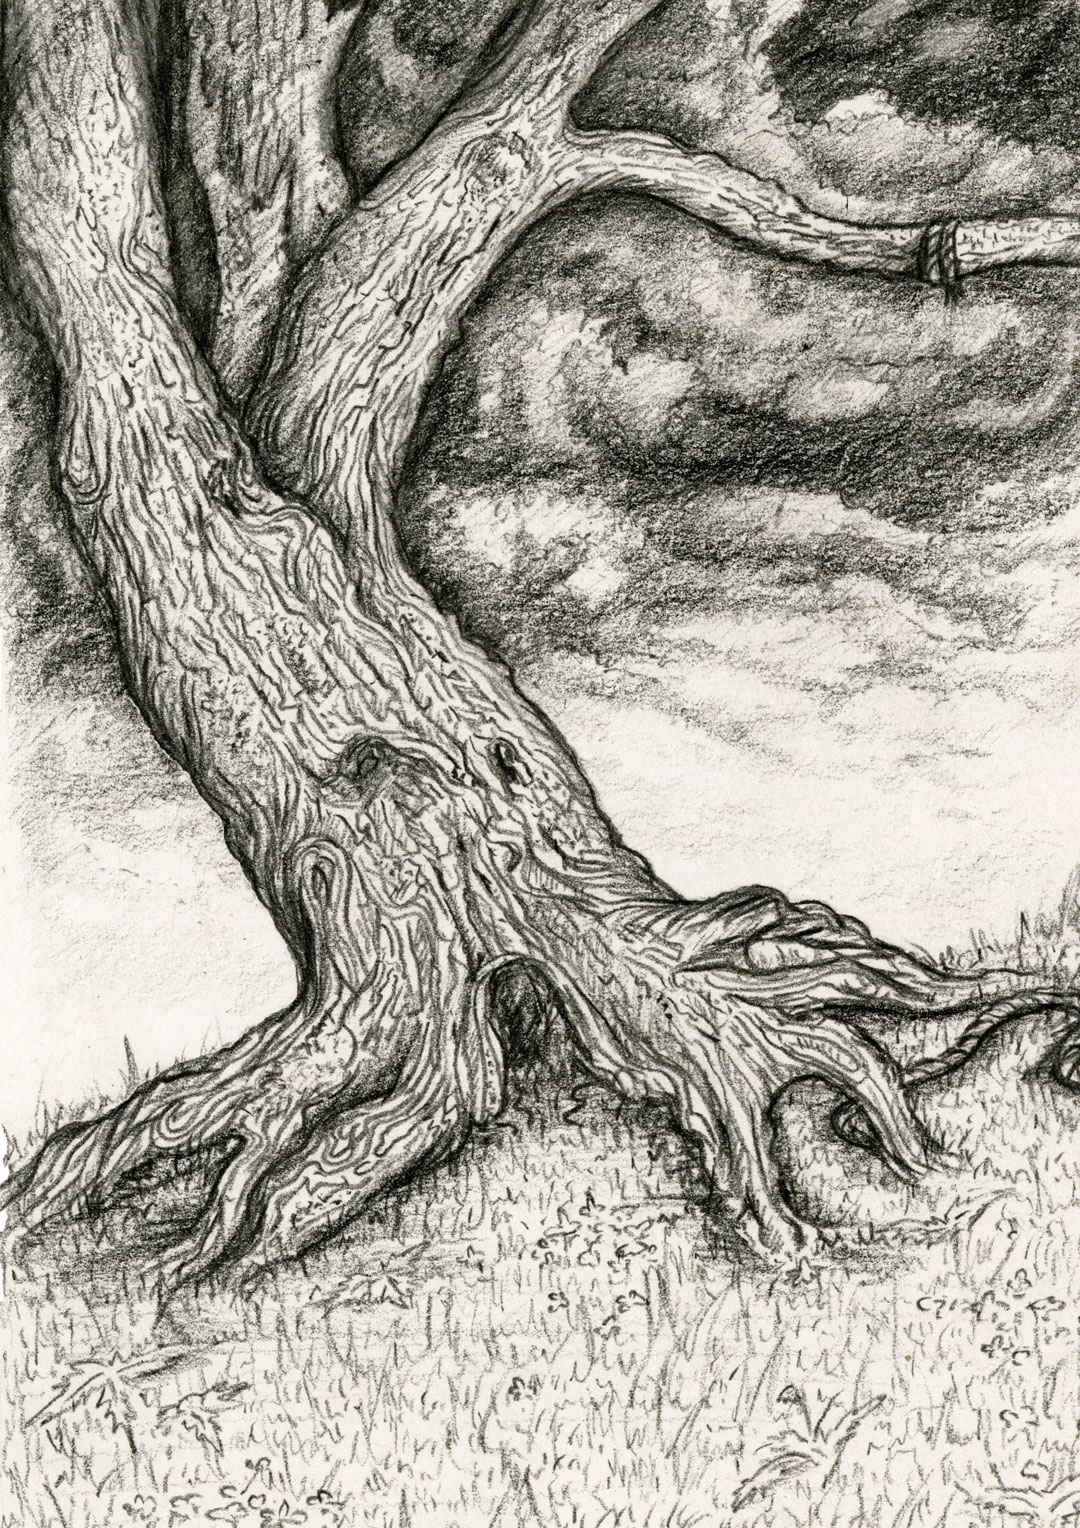 Black coloured pencil drawing on white cartridge paper. Depicts an old, twisted oak tree on a hill from which the remnants of a noose hangs, set against a stormy sky.